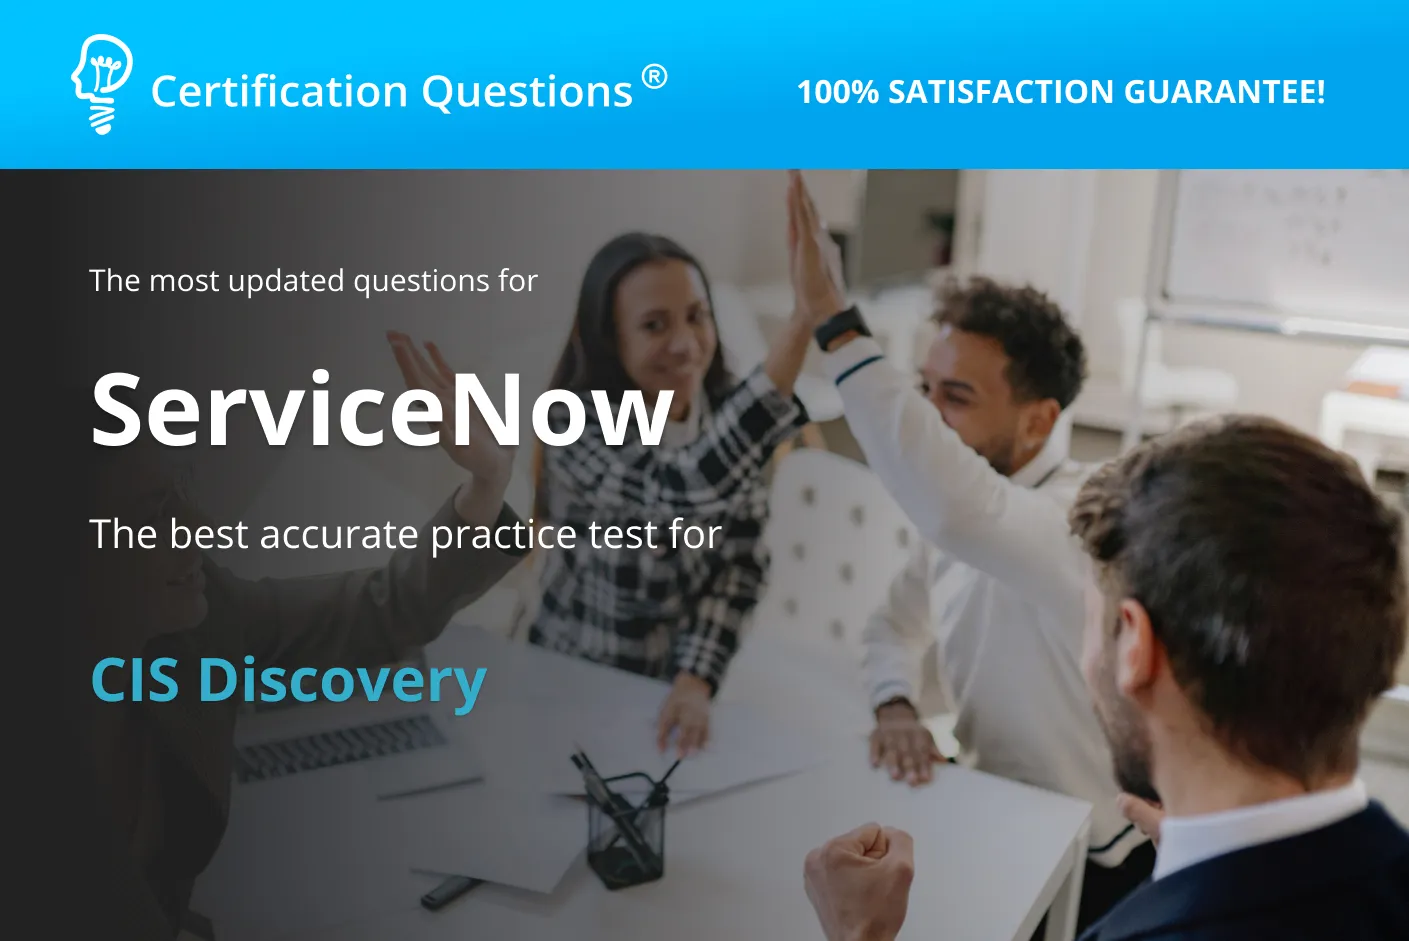 This image is related to Servicenow Discovery exam questions